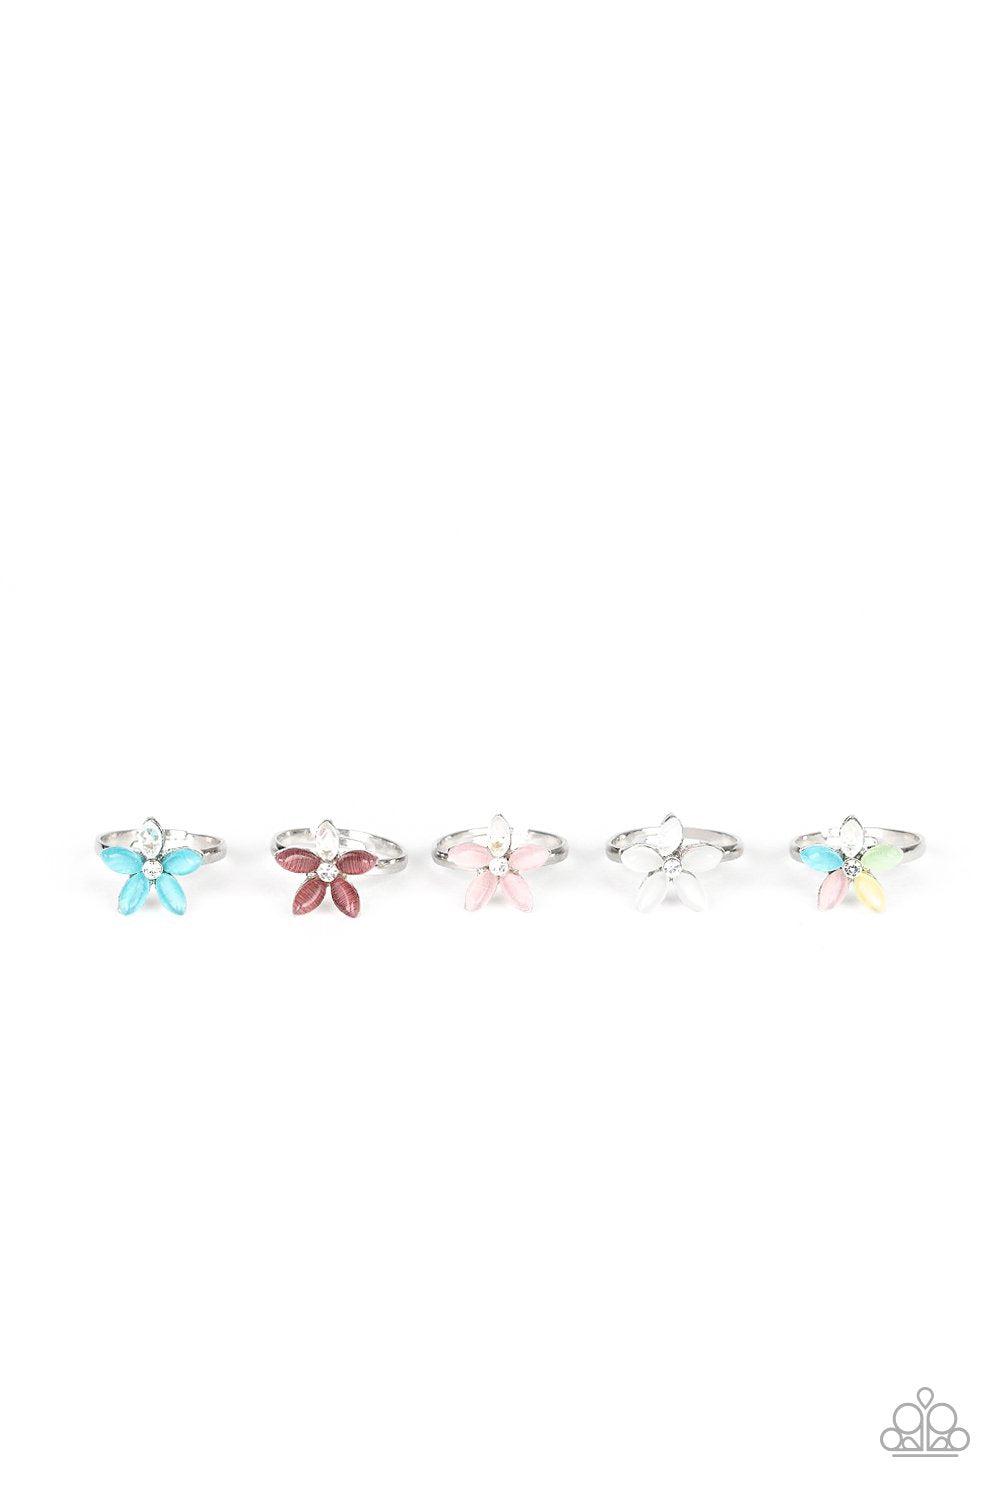 Starlet Shimmer Children's Cat's Eye Stone Flower Rings - Paparazzi Accessories-CarasShop.com - $5 Jewelry by Cara Jewels